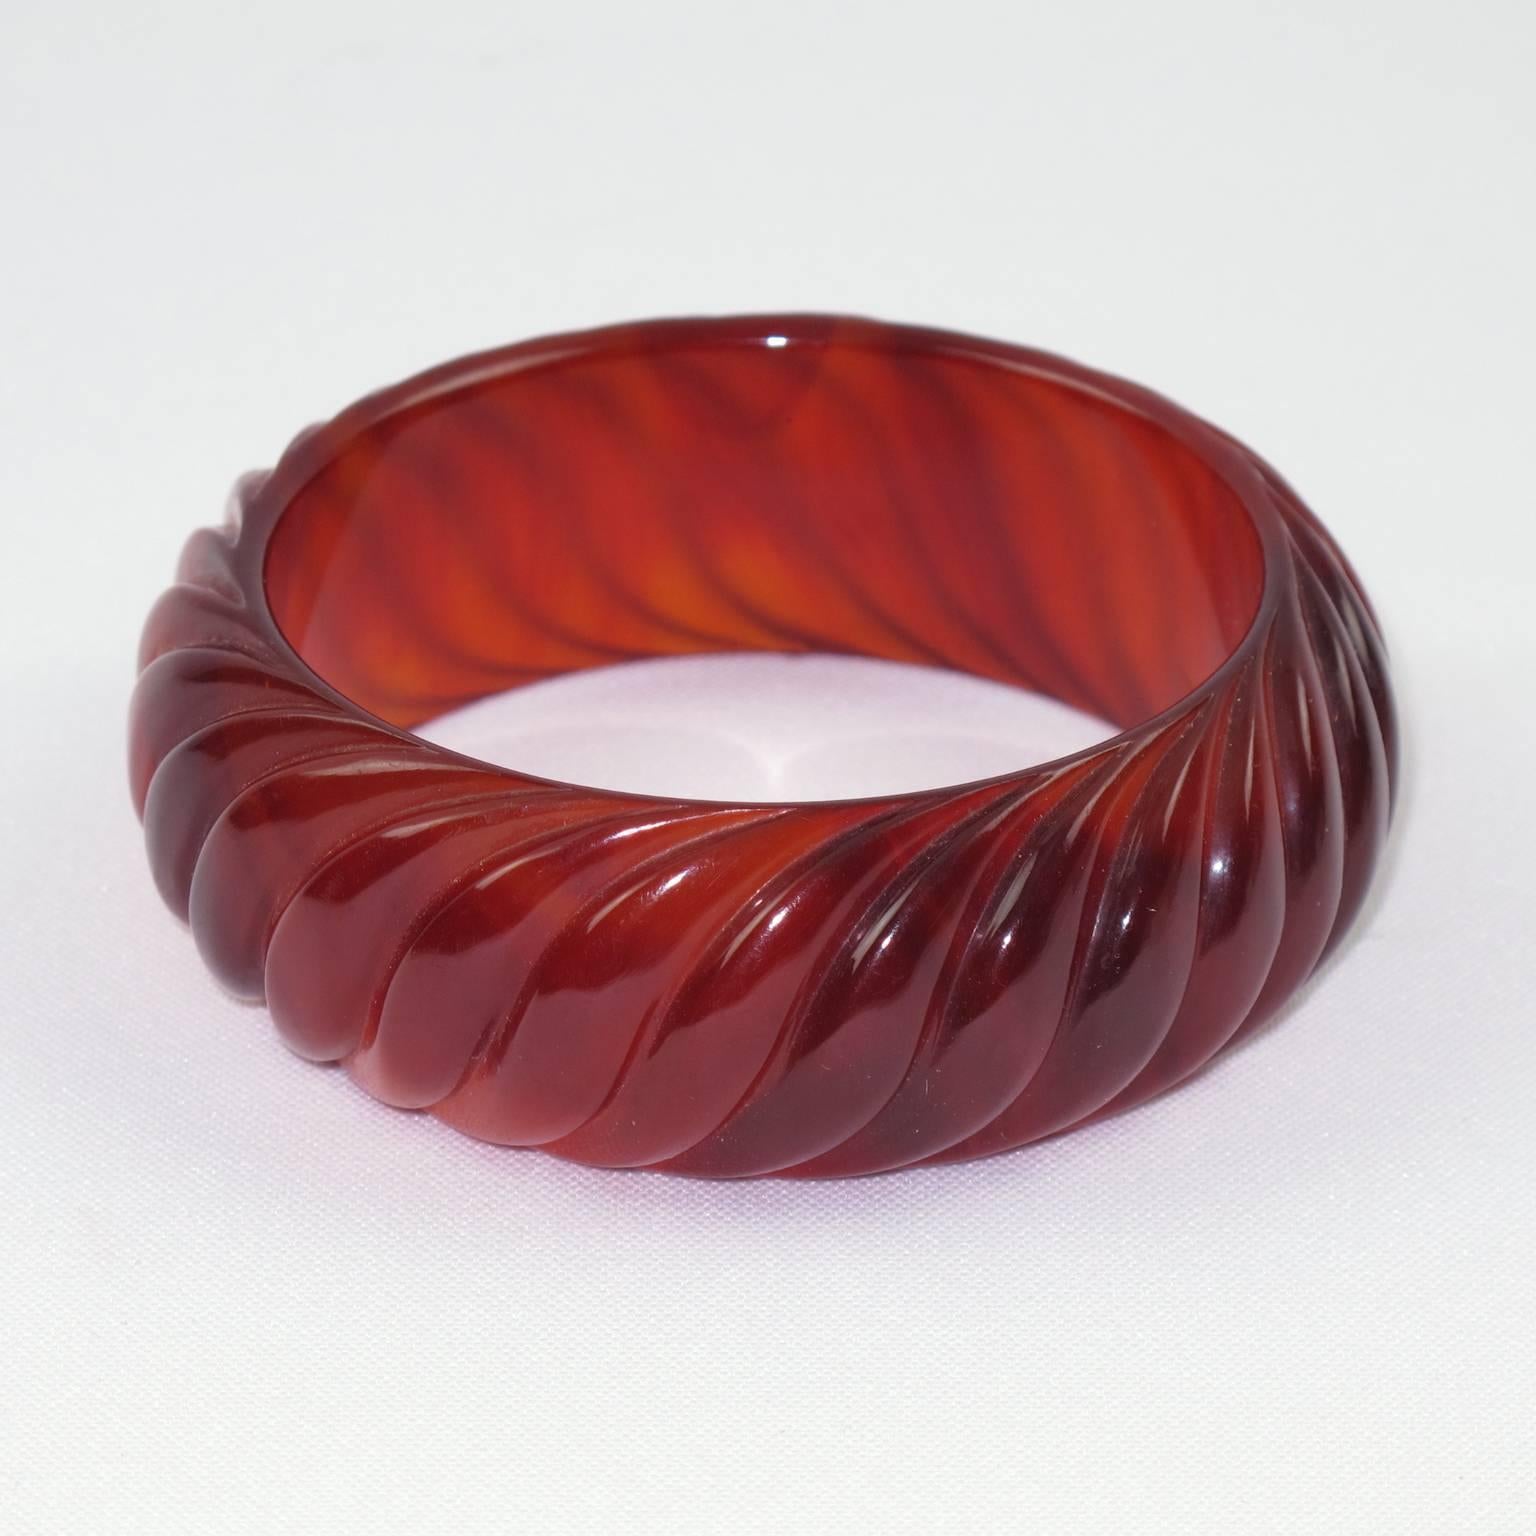 Vintage red tea amber marble Bakelite bracelet bangle. Chunky domed shape with deep geometric carved design all around and thick wall. Lovely red tea amber marble color with lots of translucency. Excellent vintage condition.  

Measurements: